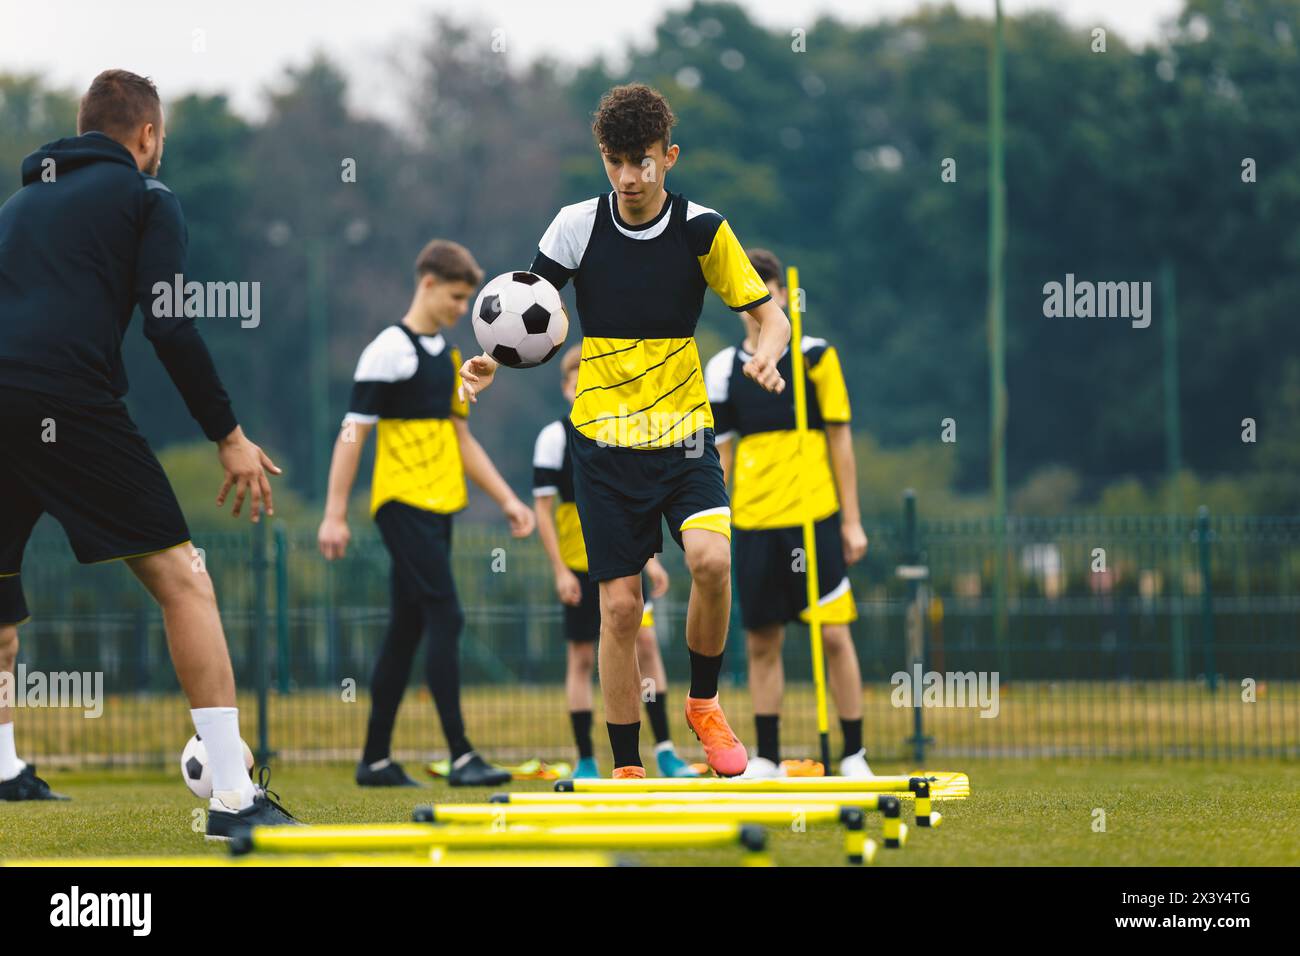 Player kick soccer ball to coach and ladder skipping. Teenagers on soccer training camp. Boys practice football with young coaches. Junior level athle Stock Photo